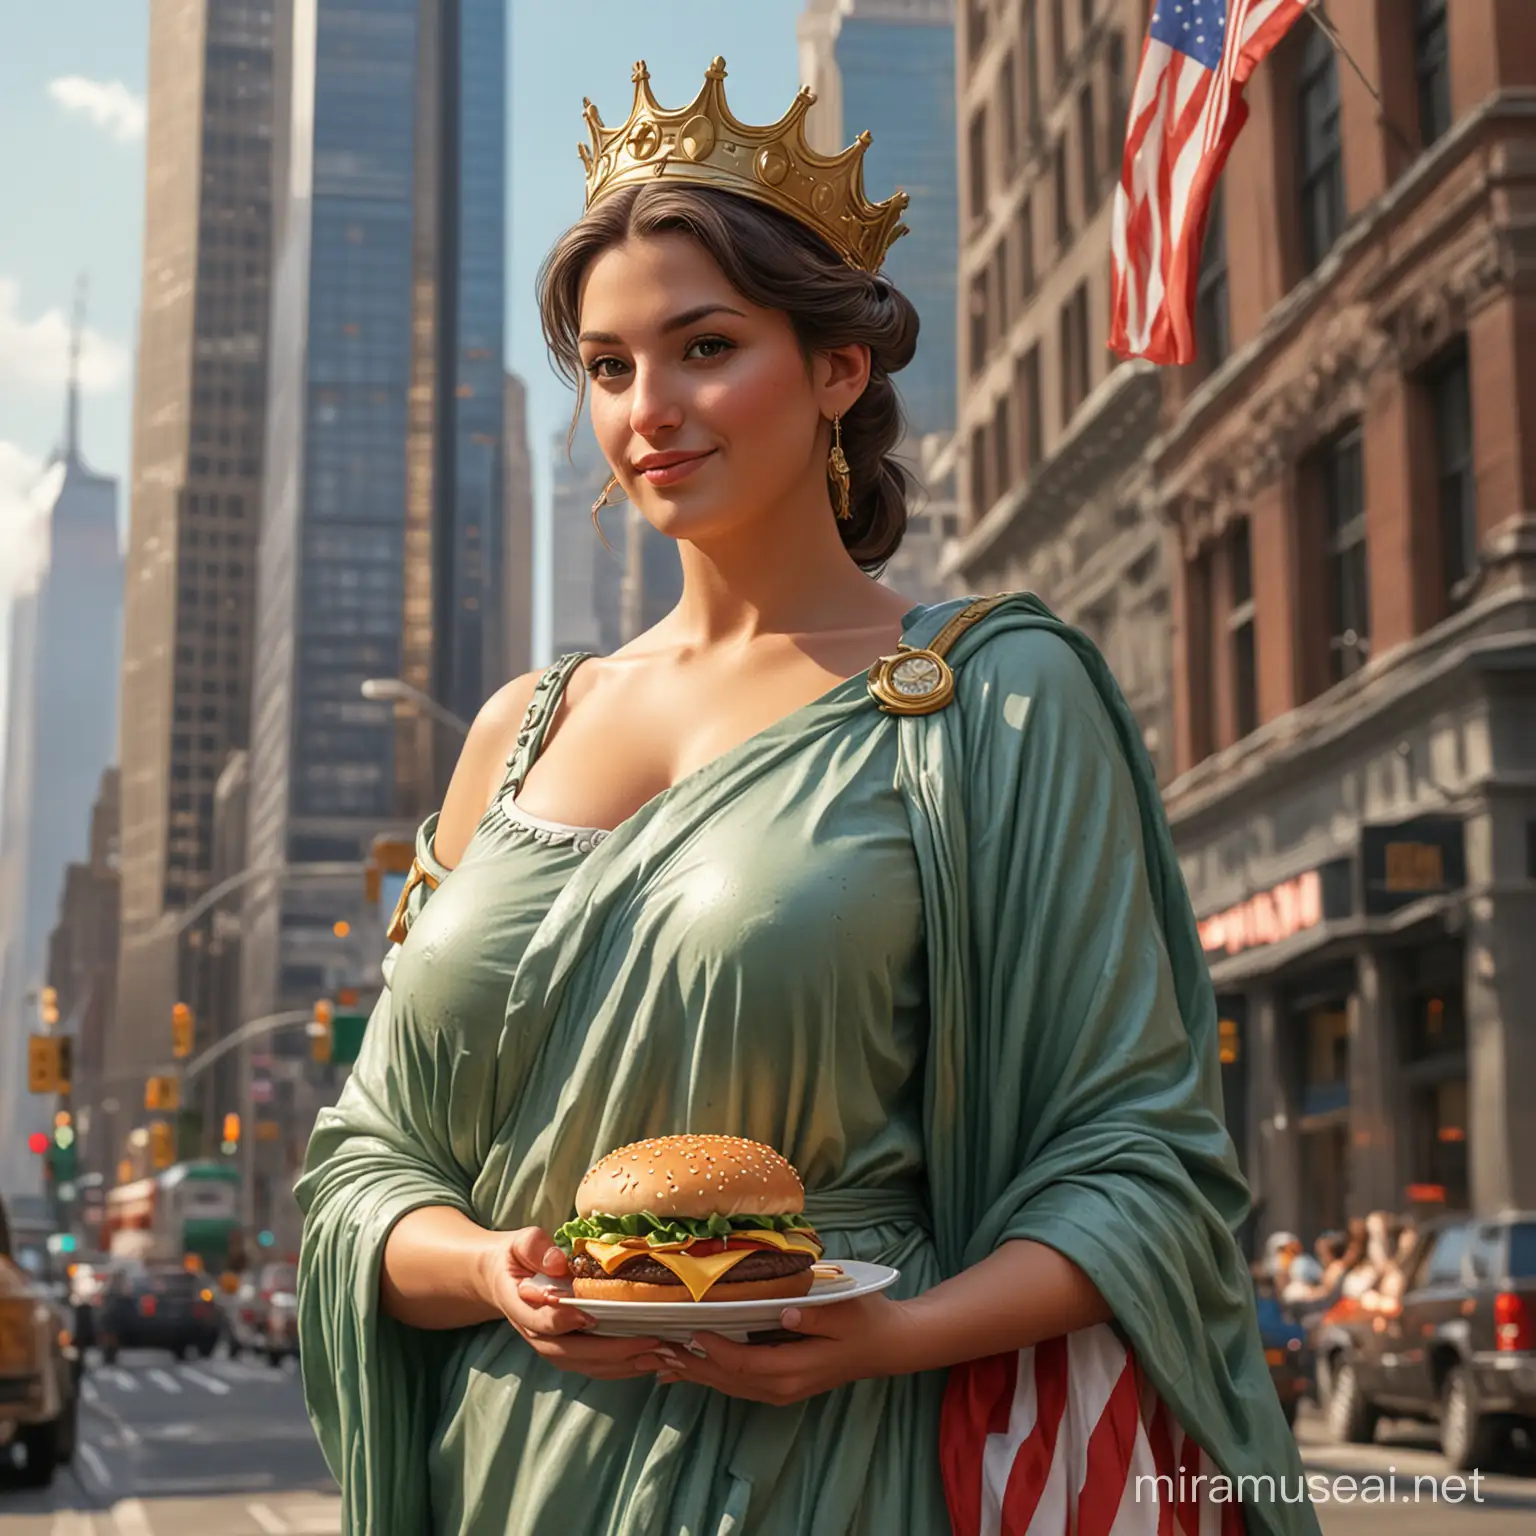 (best quality, highres, ultra-detailed, realistic), large-breasted statue of liberty, with a large, bulging belly, enjoying a juicy hamburger in her hands. Her cheeks are chubby and puffy, giving her a cute and playful appearance. The statue's eyes are filled with delight as she savors every bite of the delectable burger. The iconic crown on her head adds a regal touch to her jovial expression. The scene is bathed in warm, golden sunlight, accentuating the vibrant colors of the American flag draped around her shoulders. The background showcases the majestic New York City skyline, with towering skyscrapers and bustling activity. The overall atmosphere is lively and celebratory, capturing the essence of freedom and indulgence.